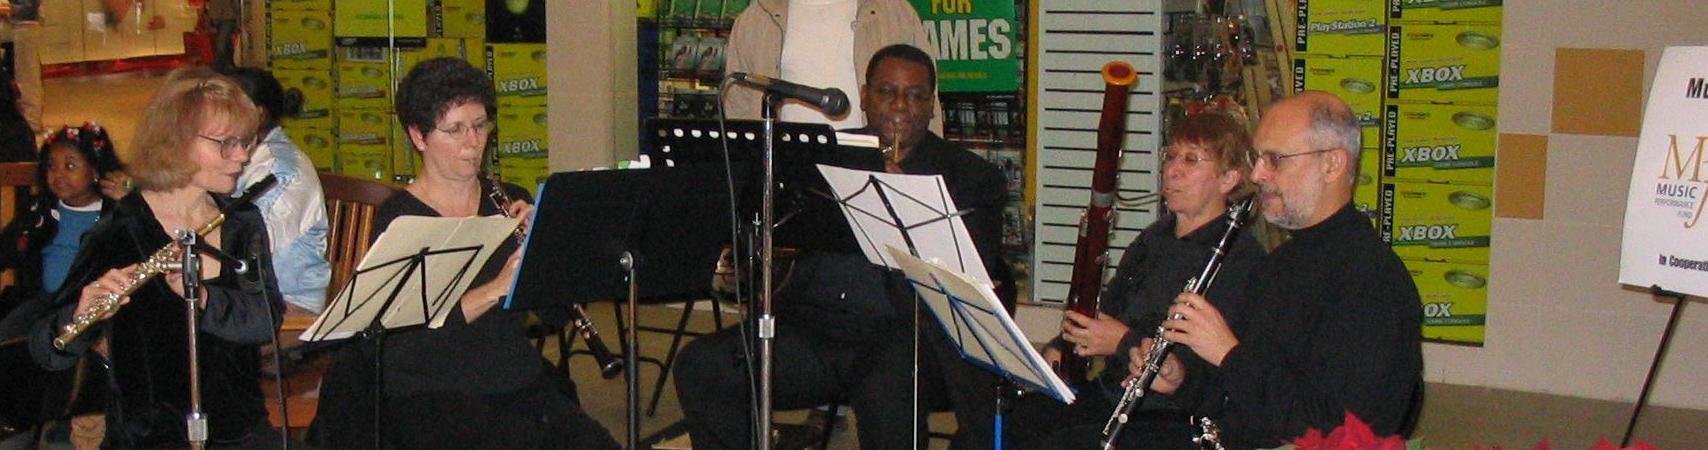 Photo of Pastoral
Winds performing at Moorestown Mall on December 8, 2005